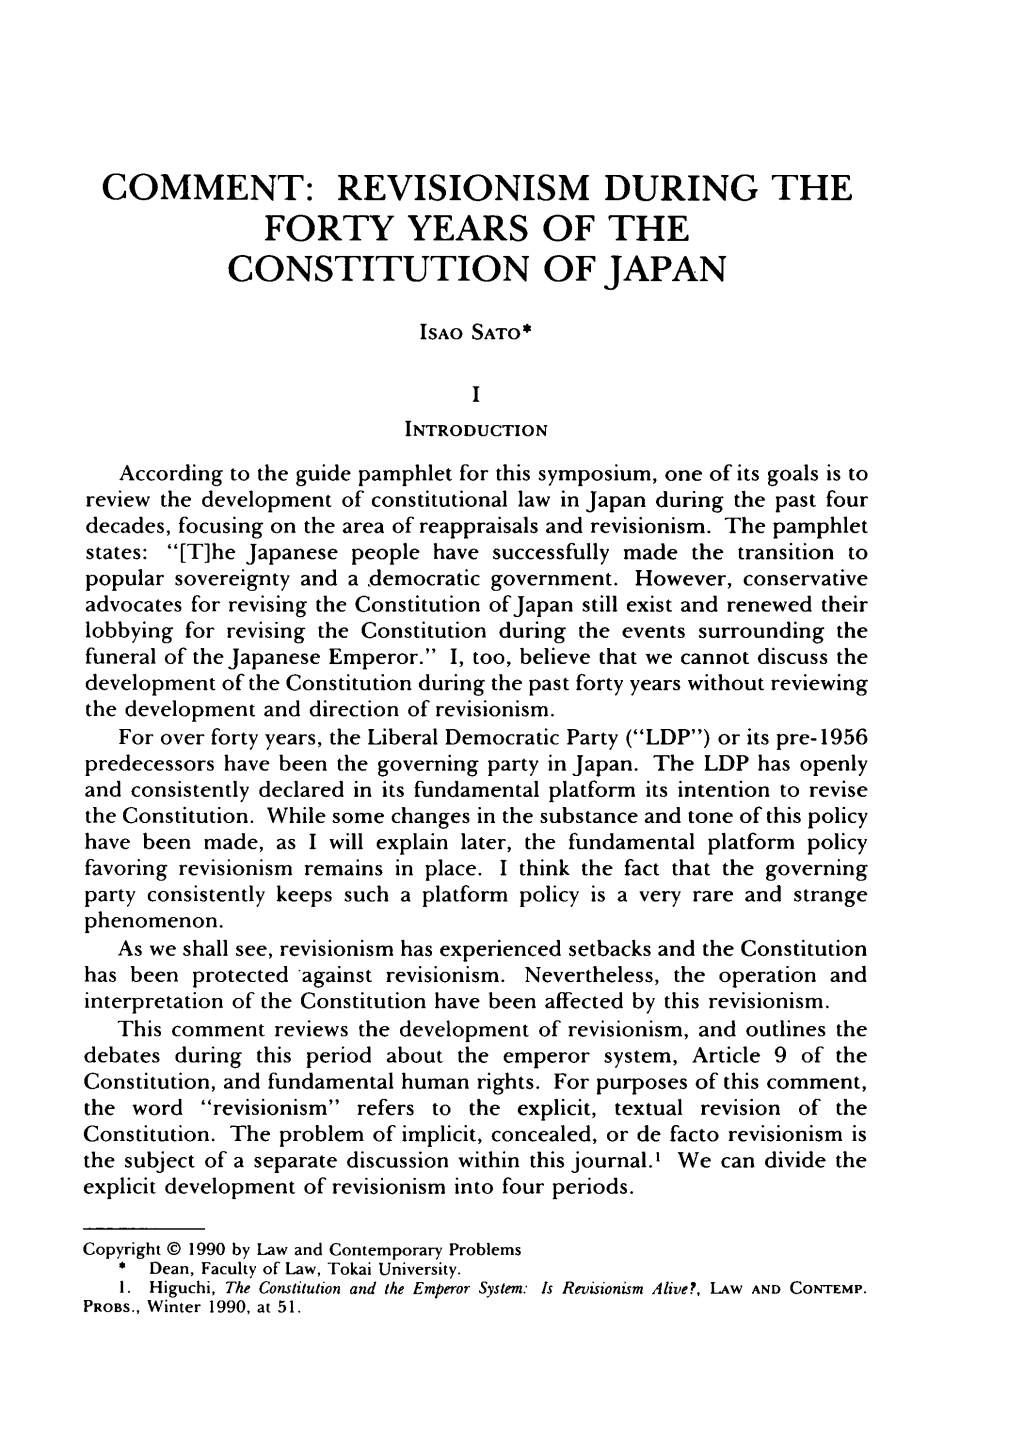 Revisionism During the Forty Years of the Constitution of Japan